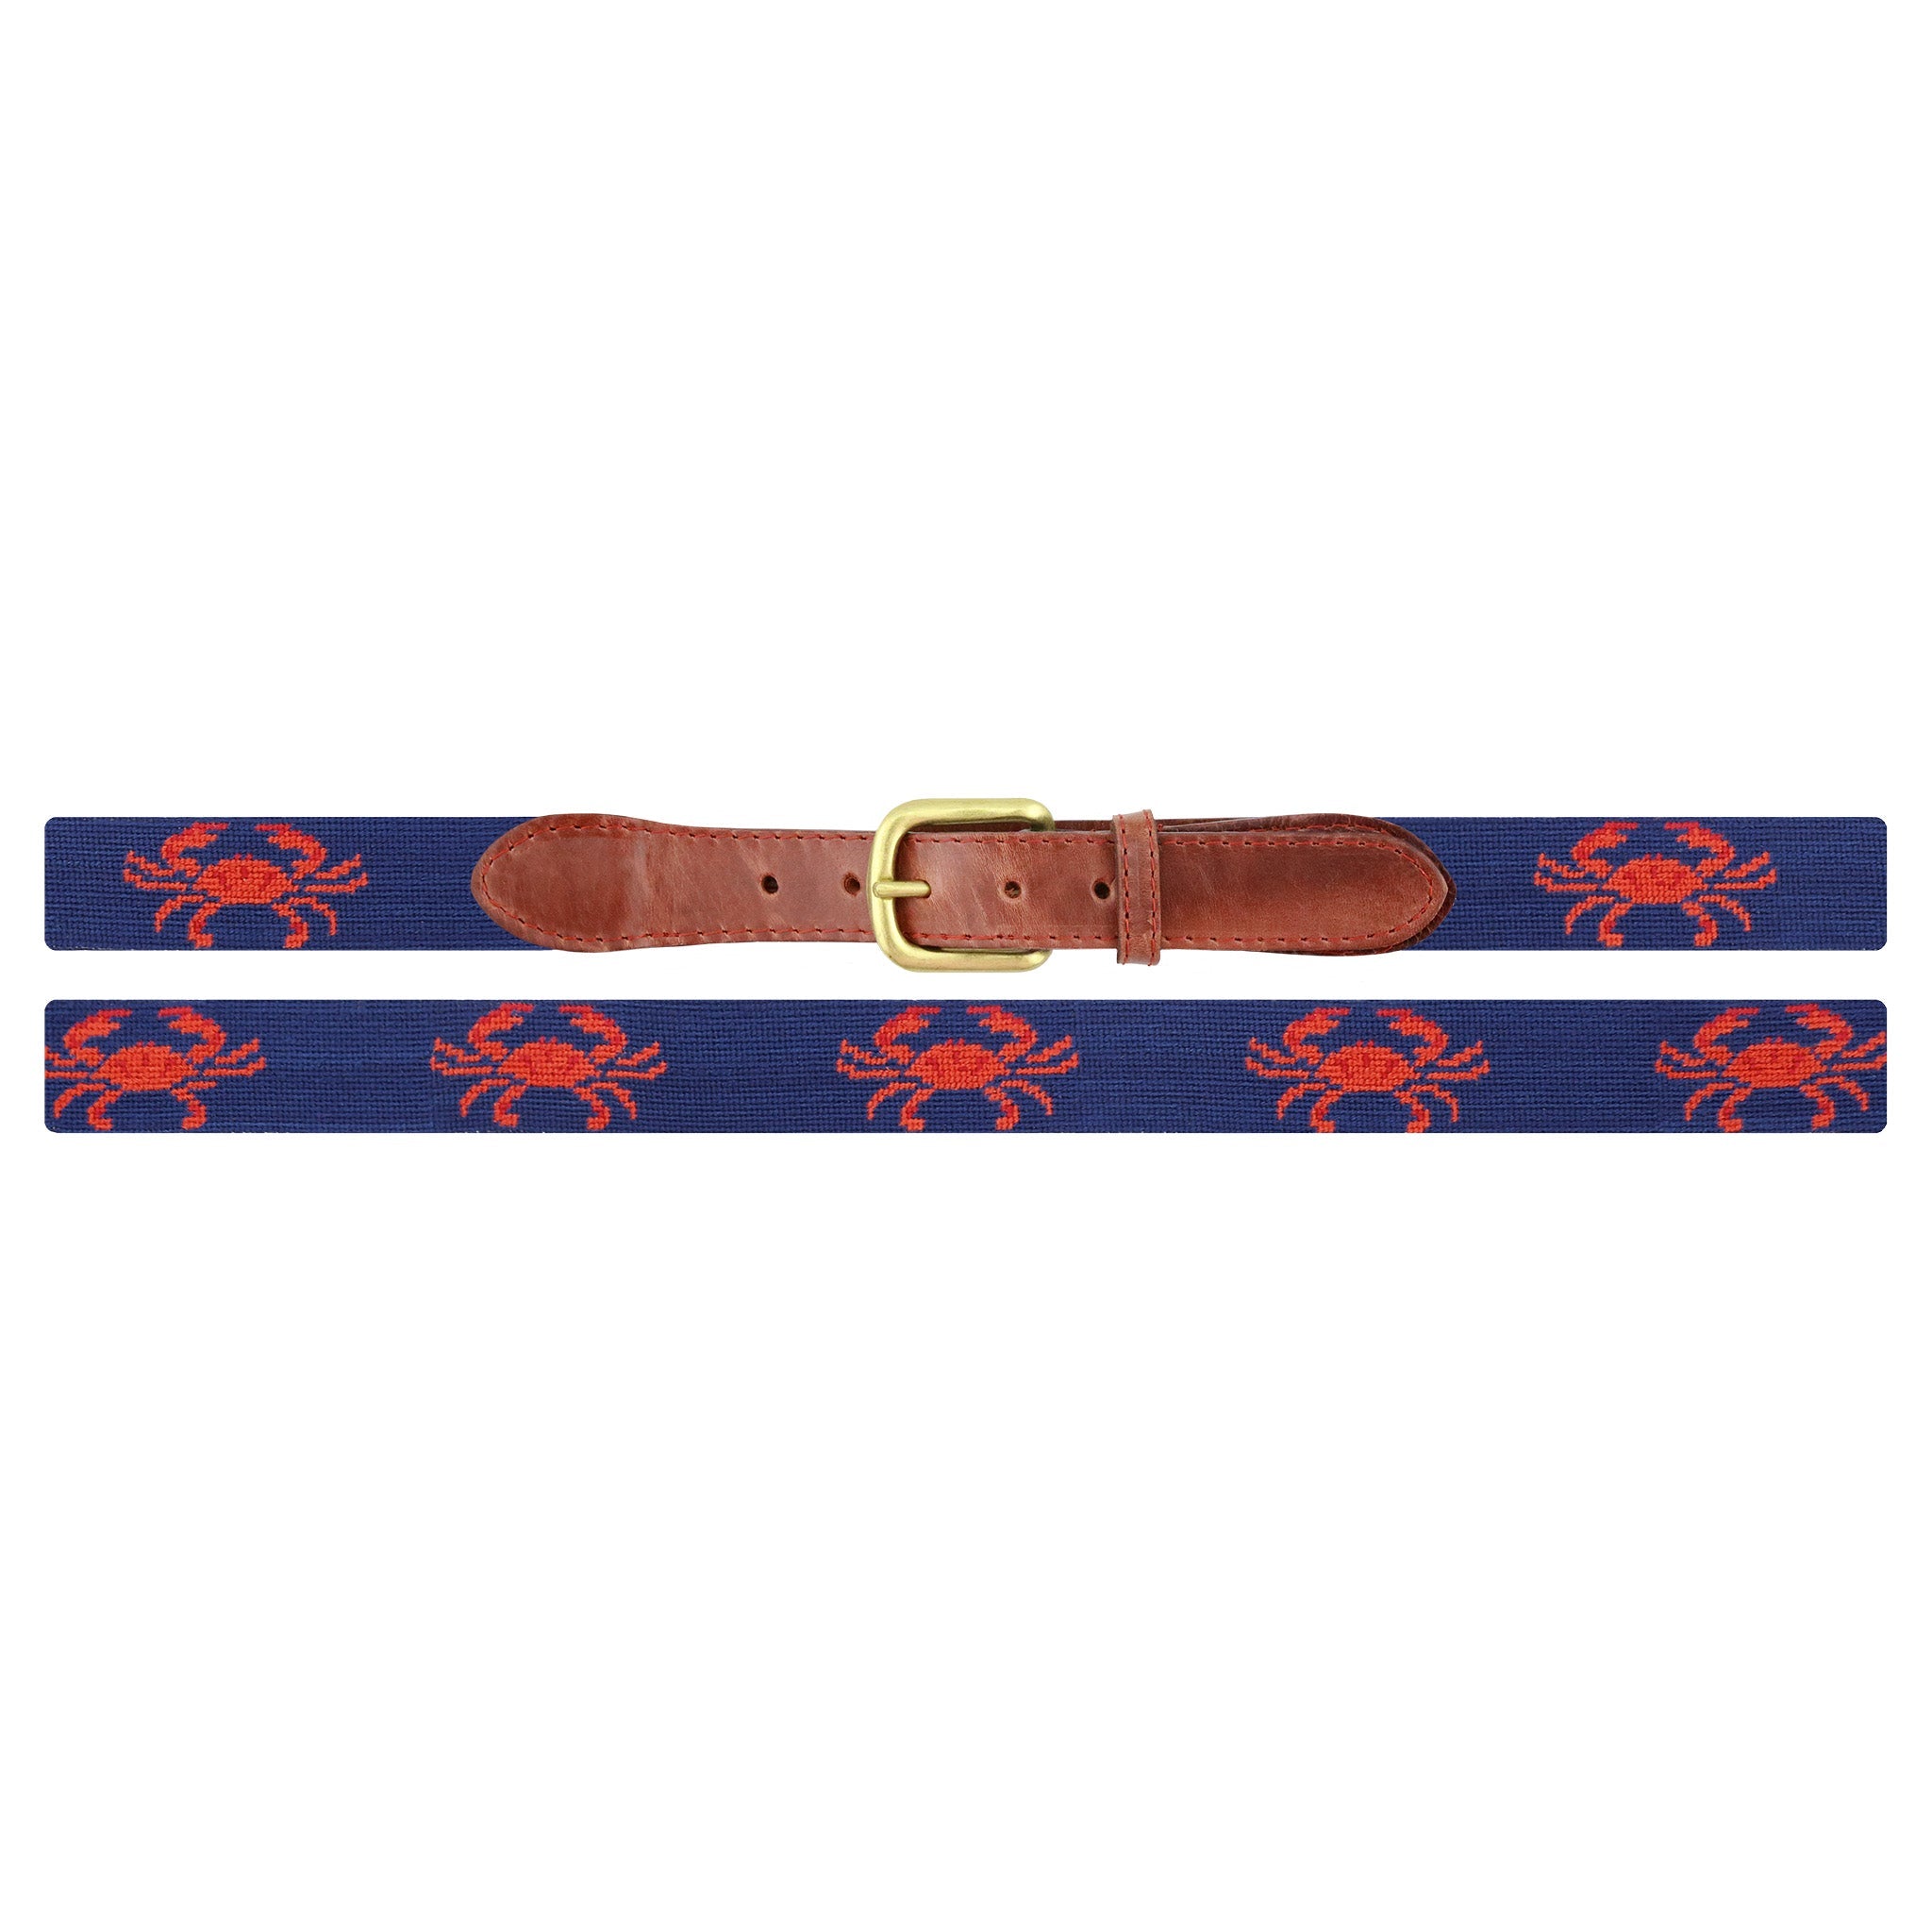 Smathers and Branson classic navy coral crab needlepoint belt with red crabs